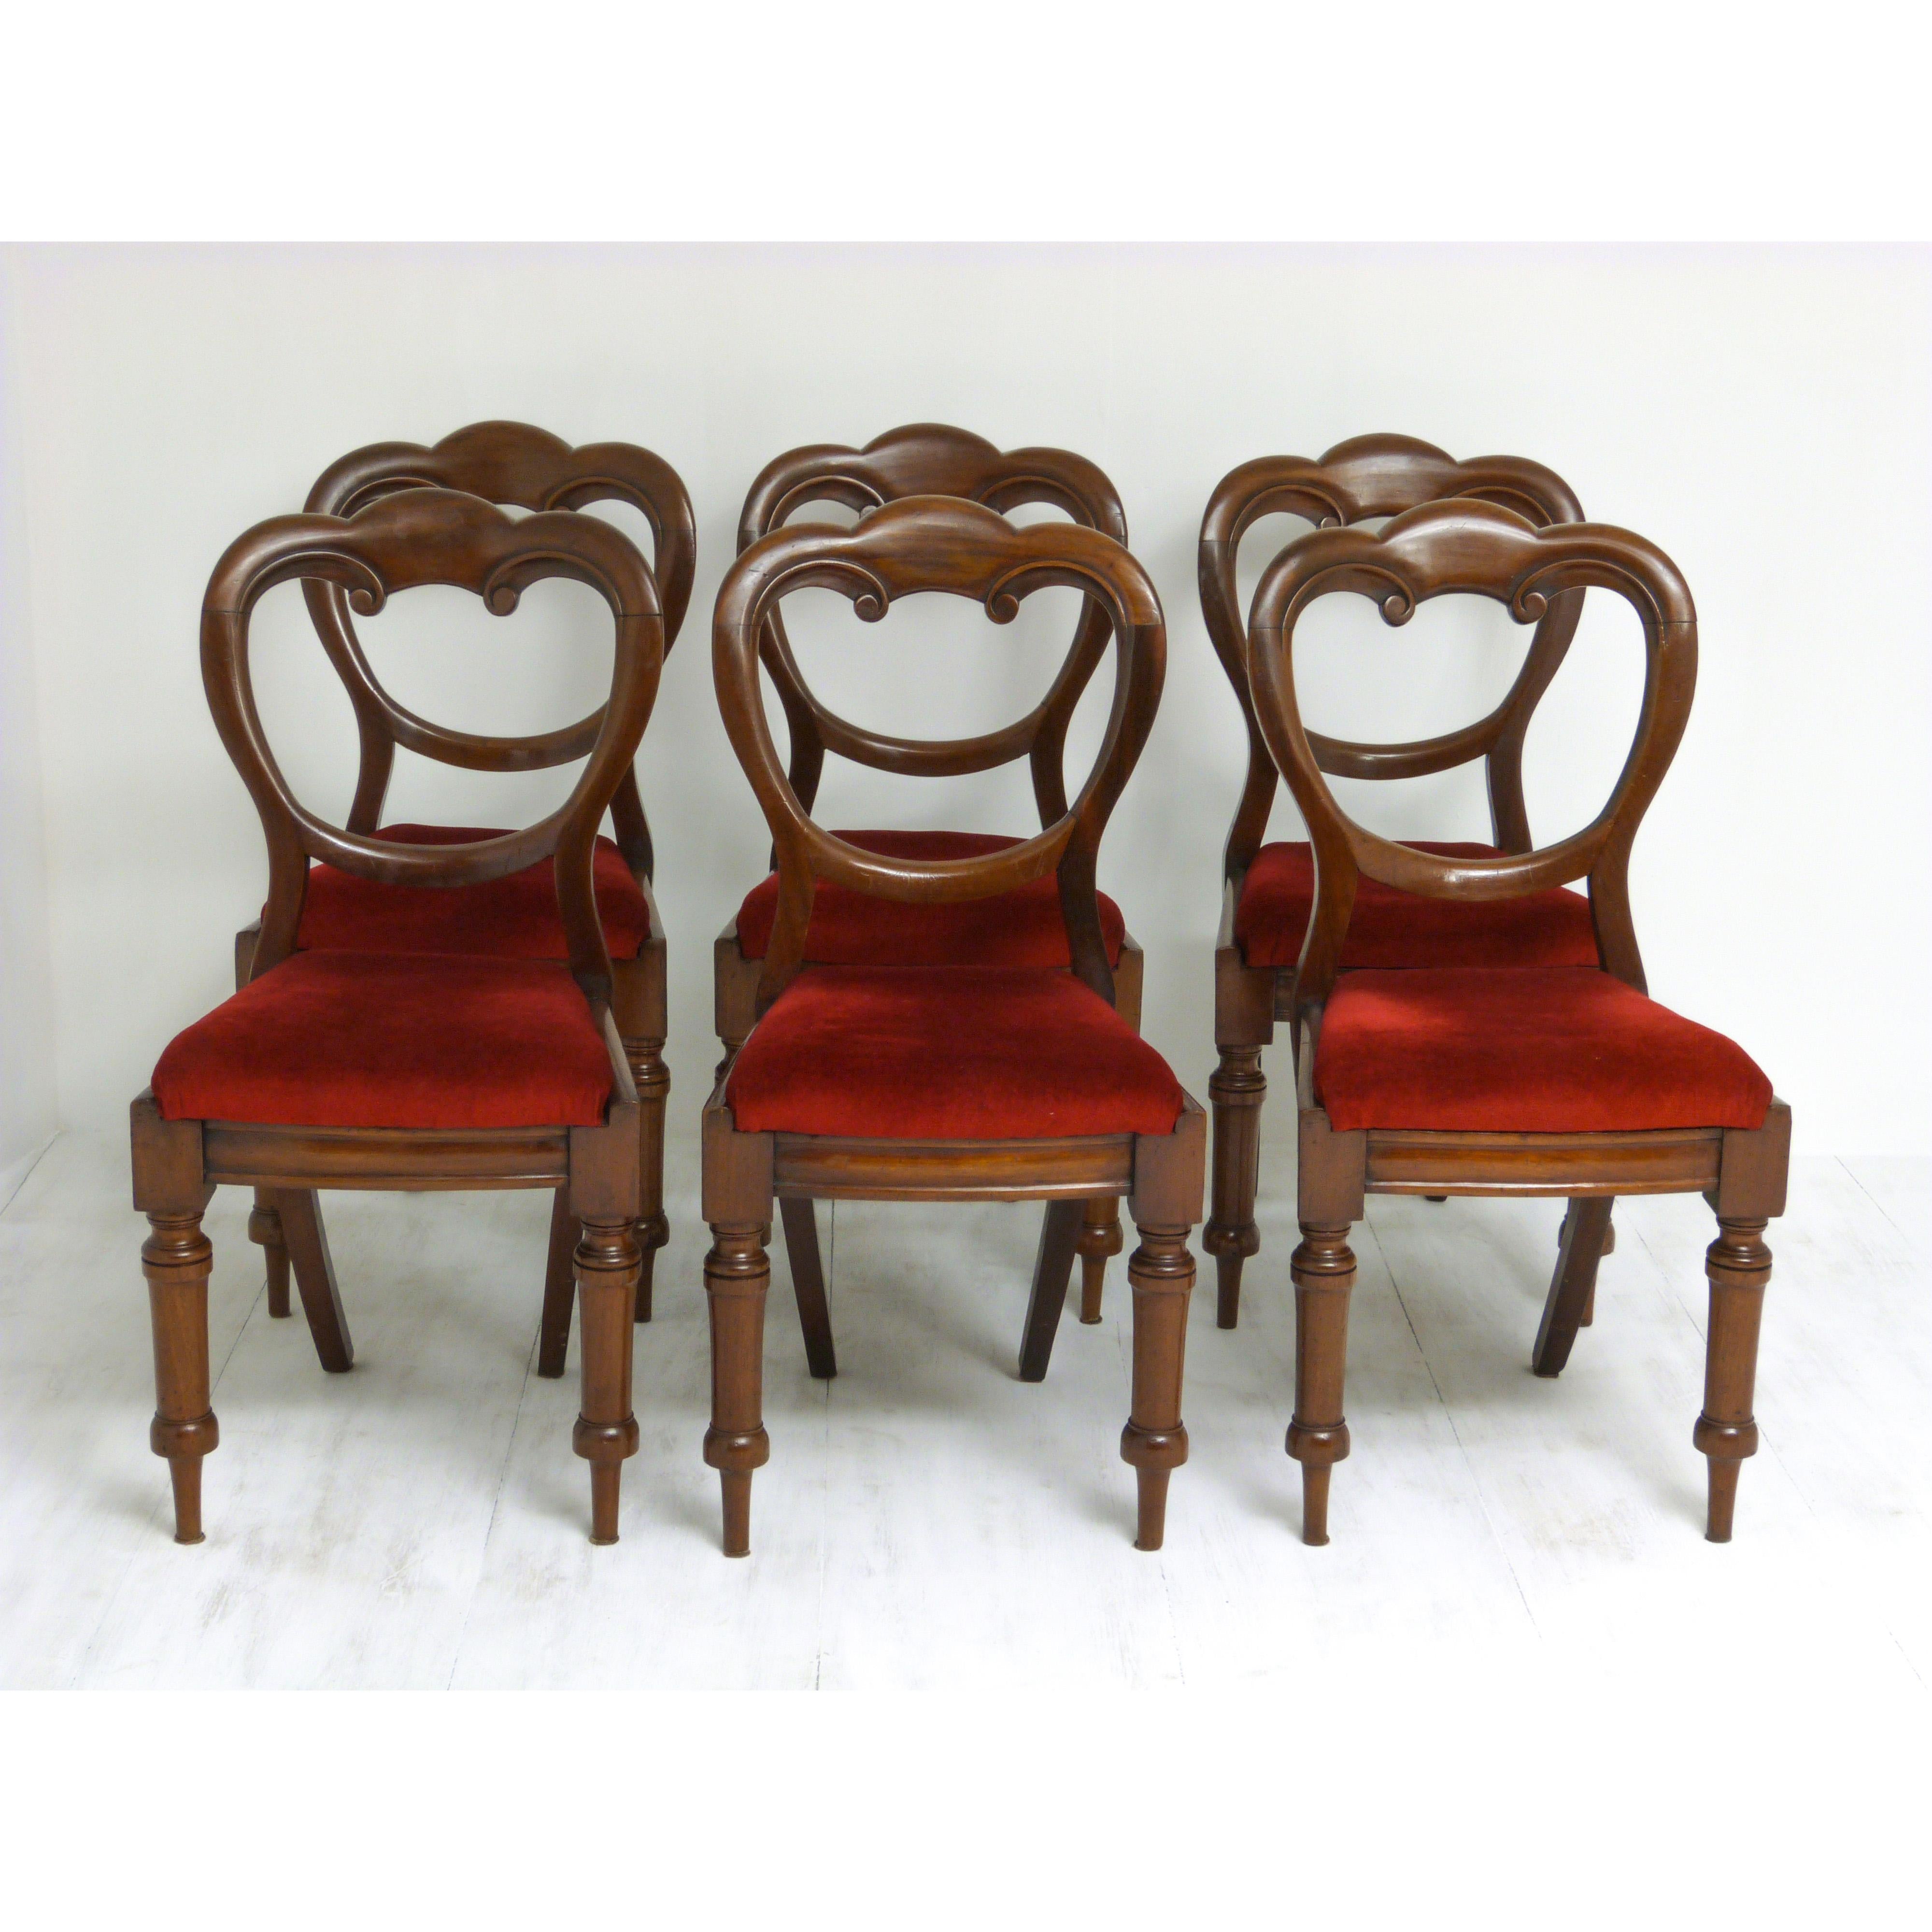 English Set of Six Victorian Chairs